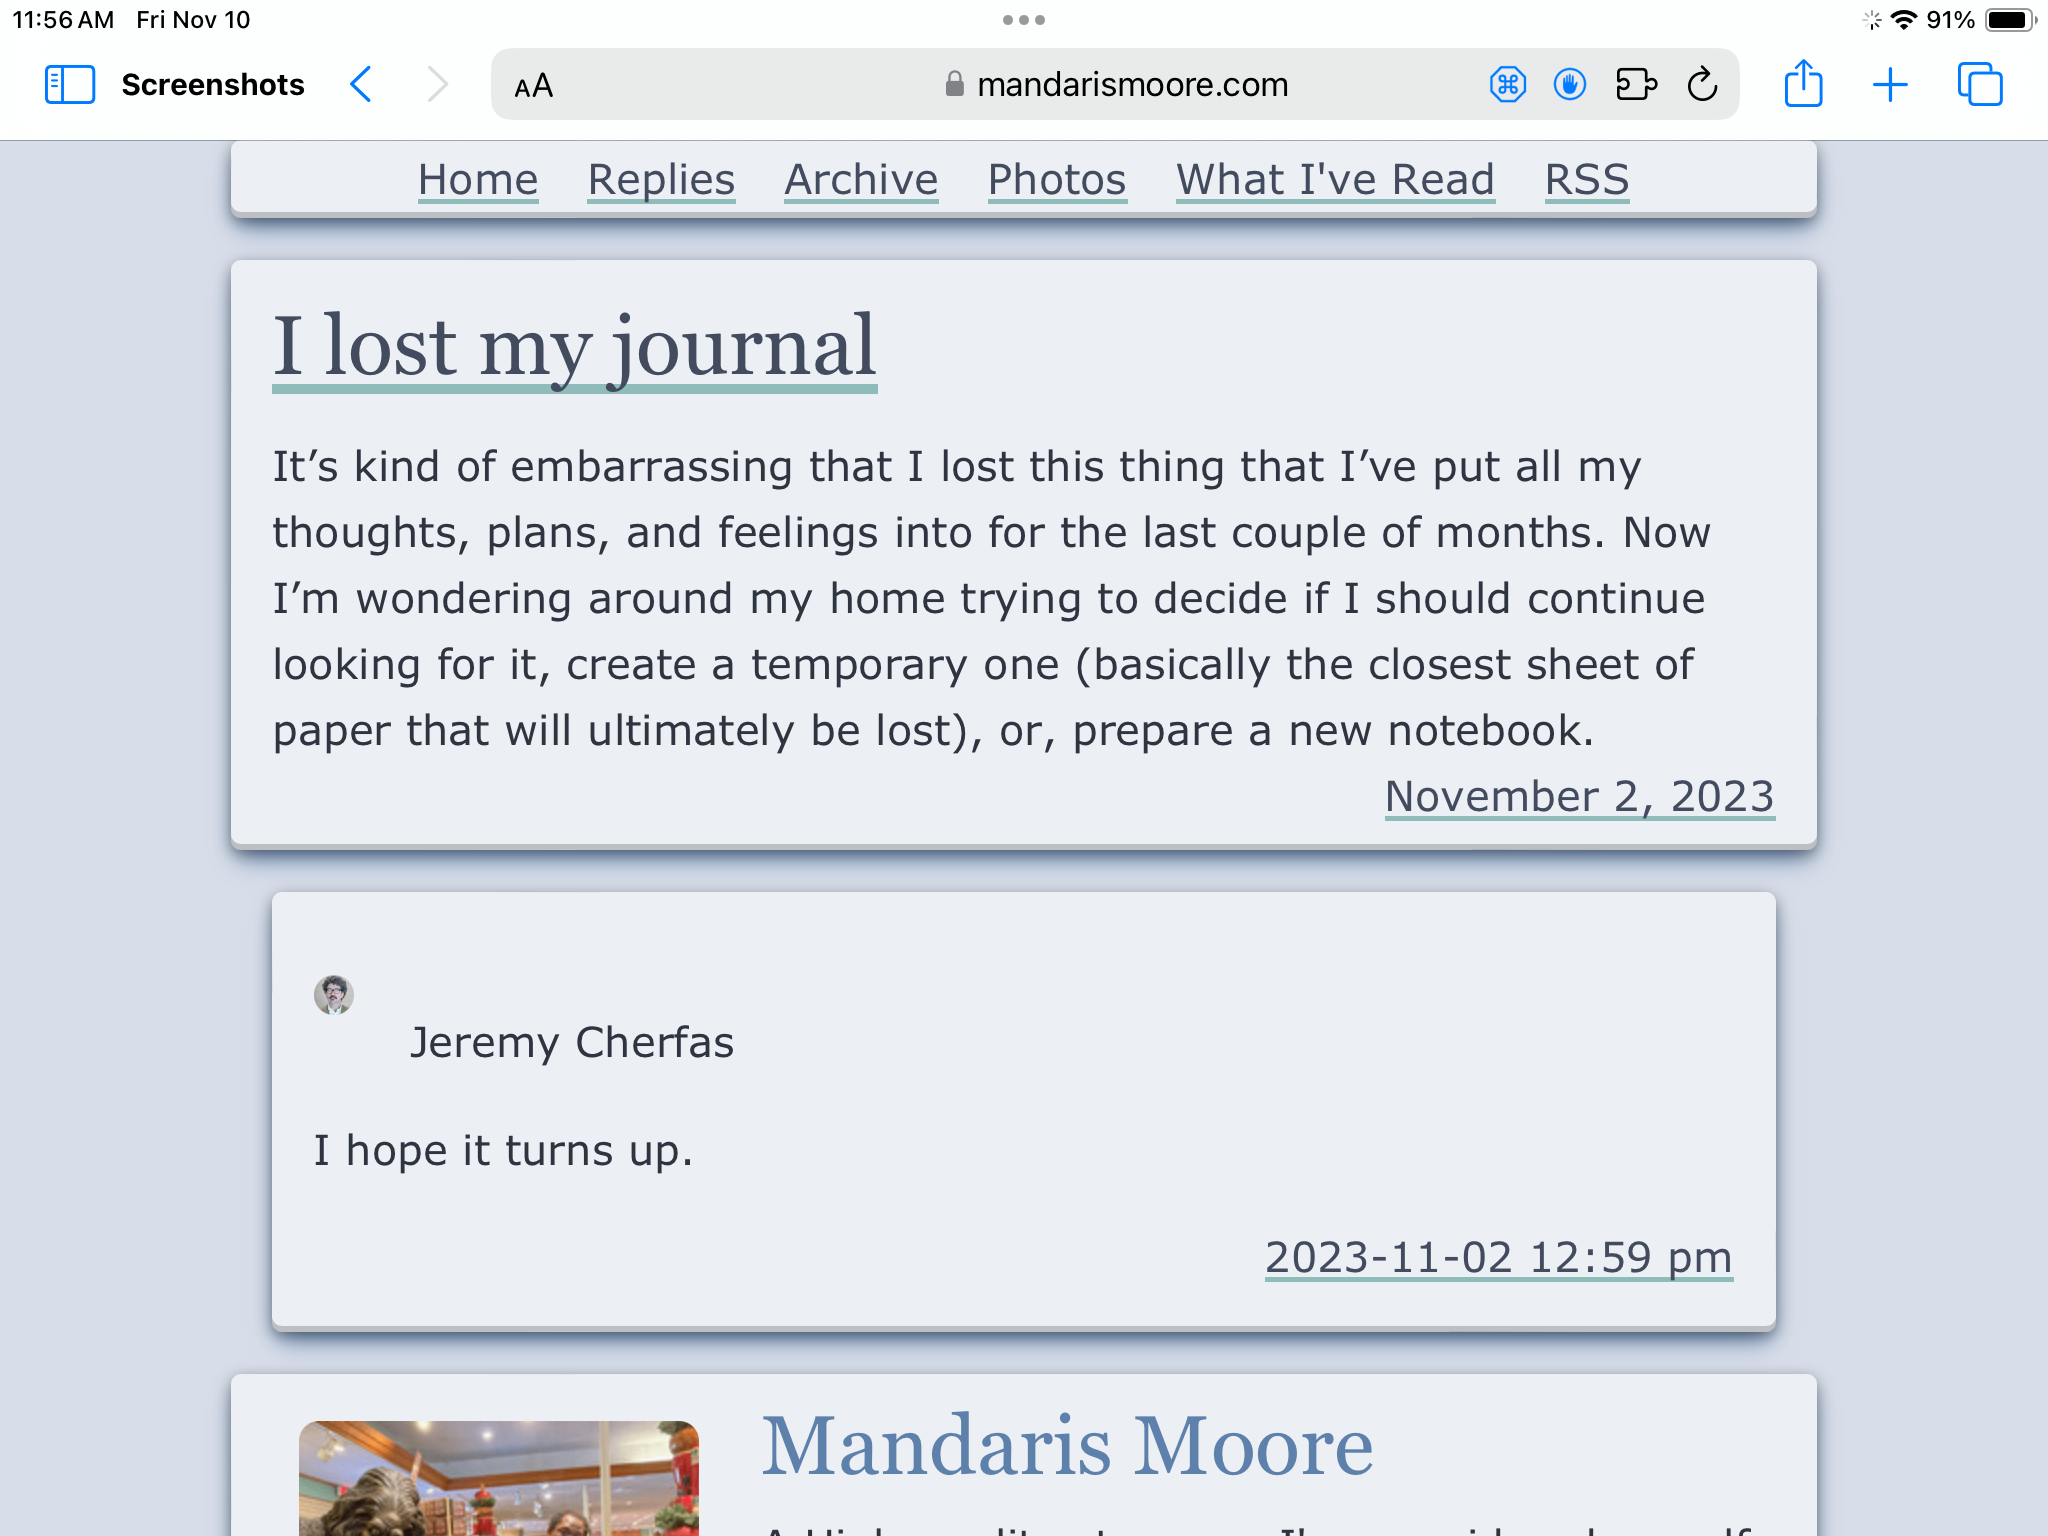 Showing comments having additional margin compared to articles, headers, and footers.